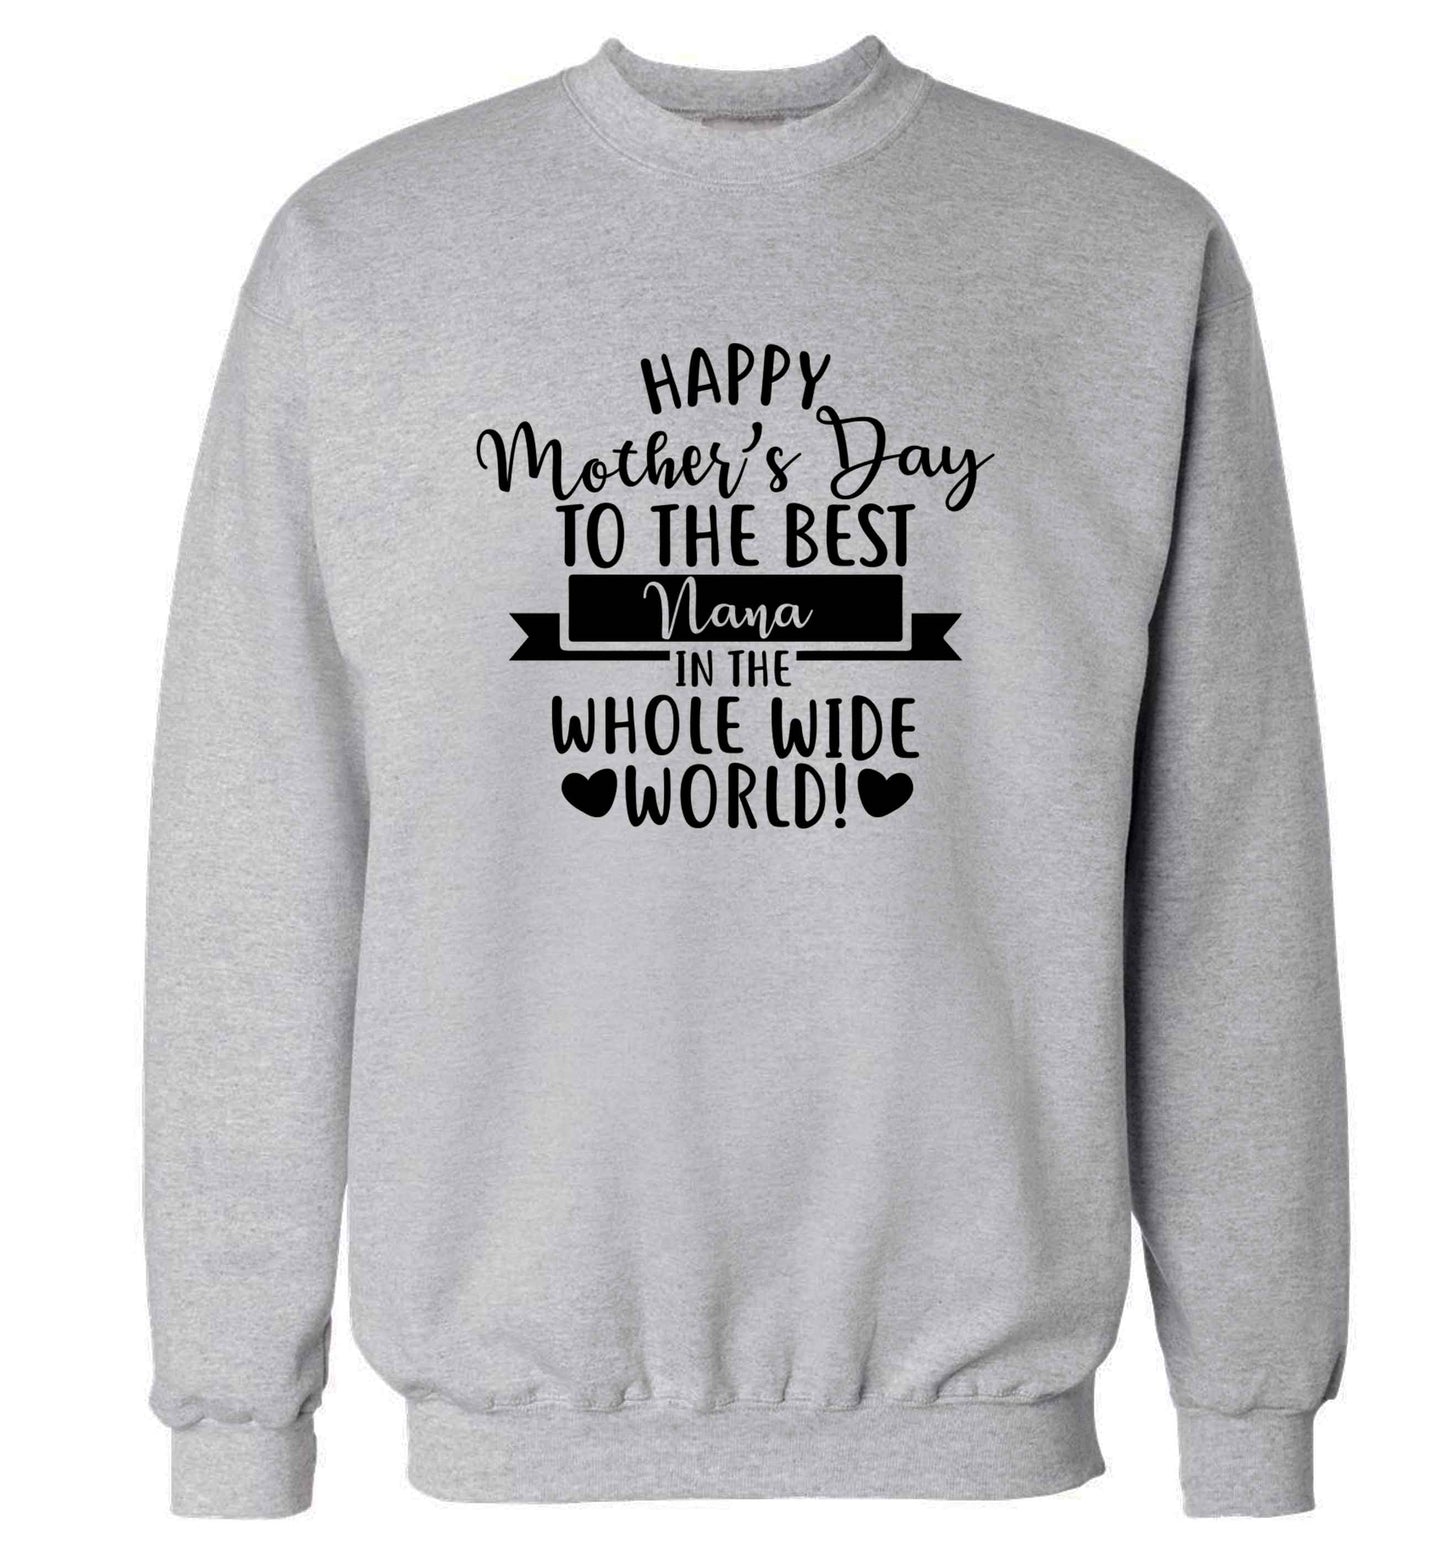 Happy mother's day to the best nana in the world adult's unisex grey sweater 2XL